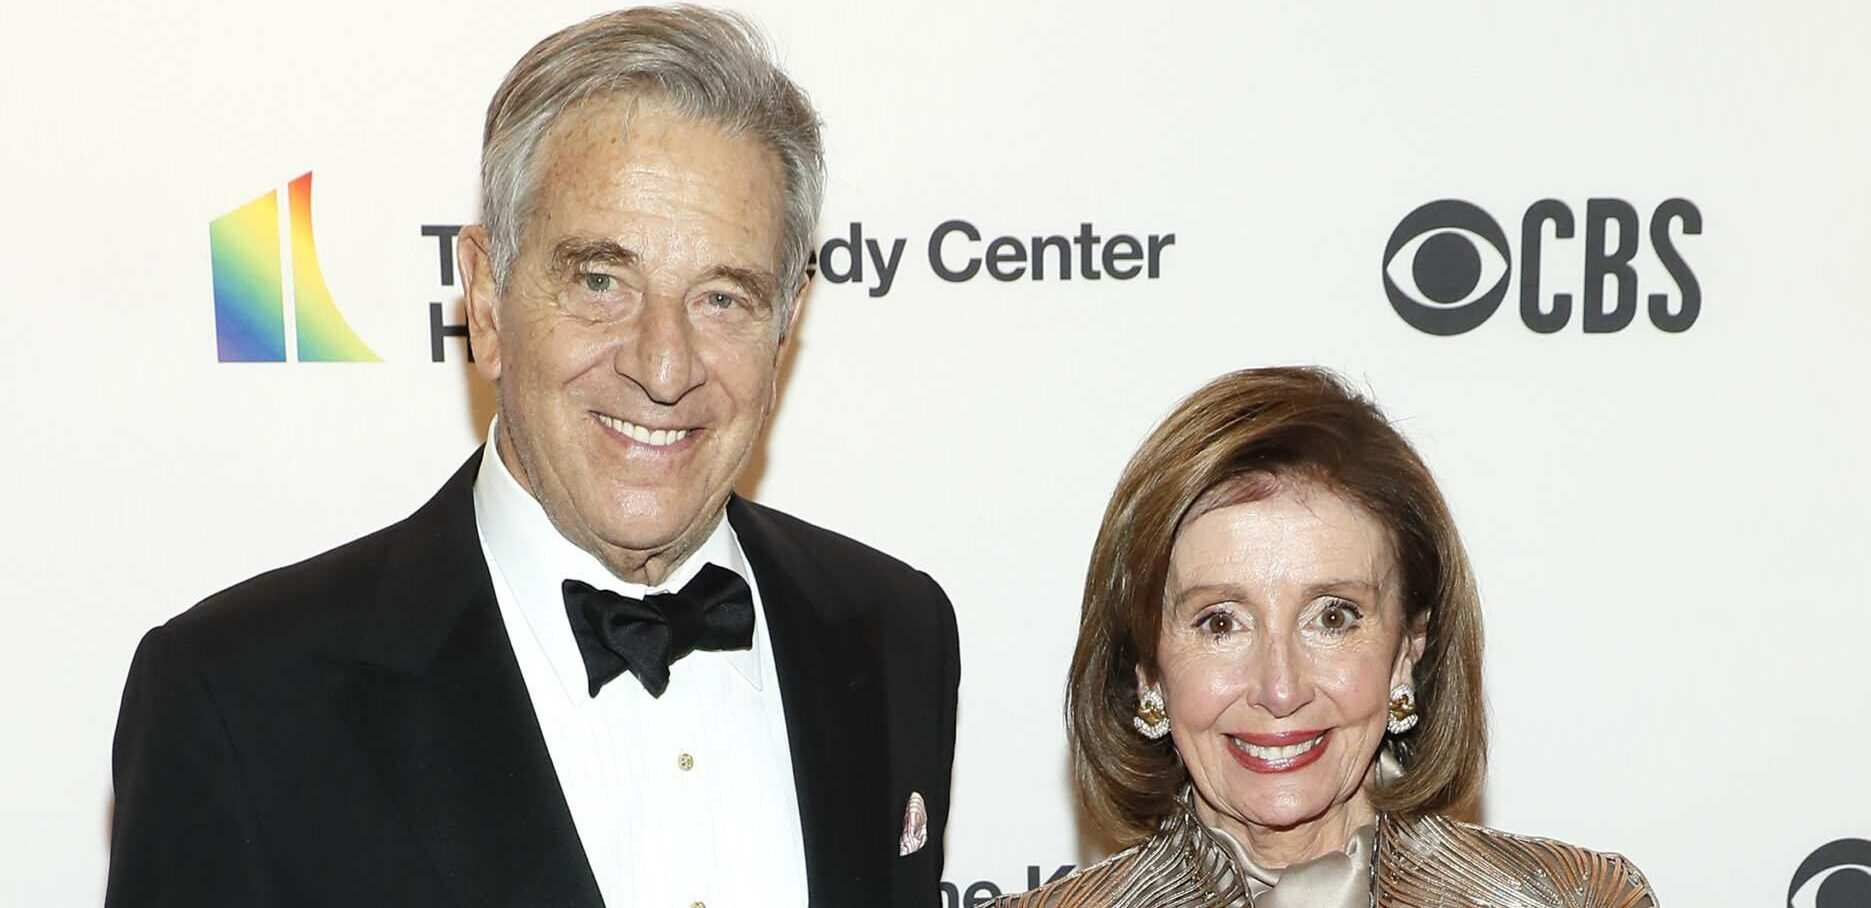 David DePape found guilty in federal court for trying to kidnap Nancy Pelosi, attacking her husband